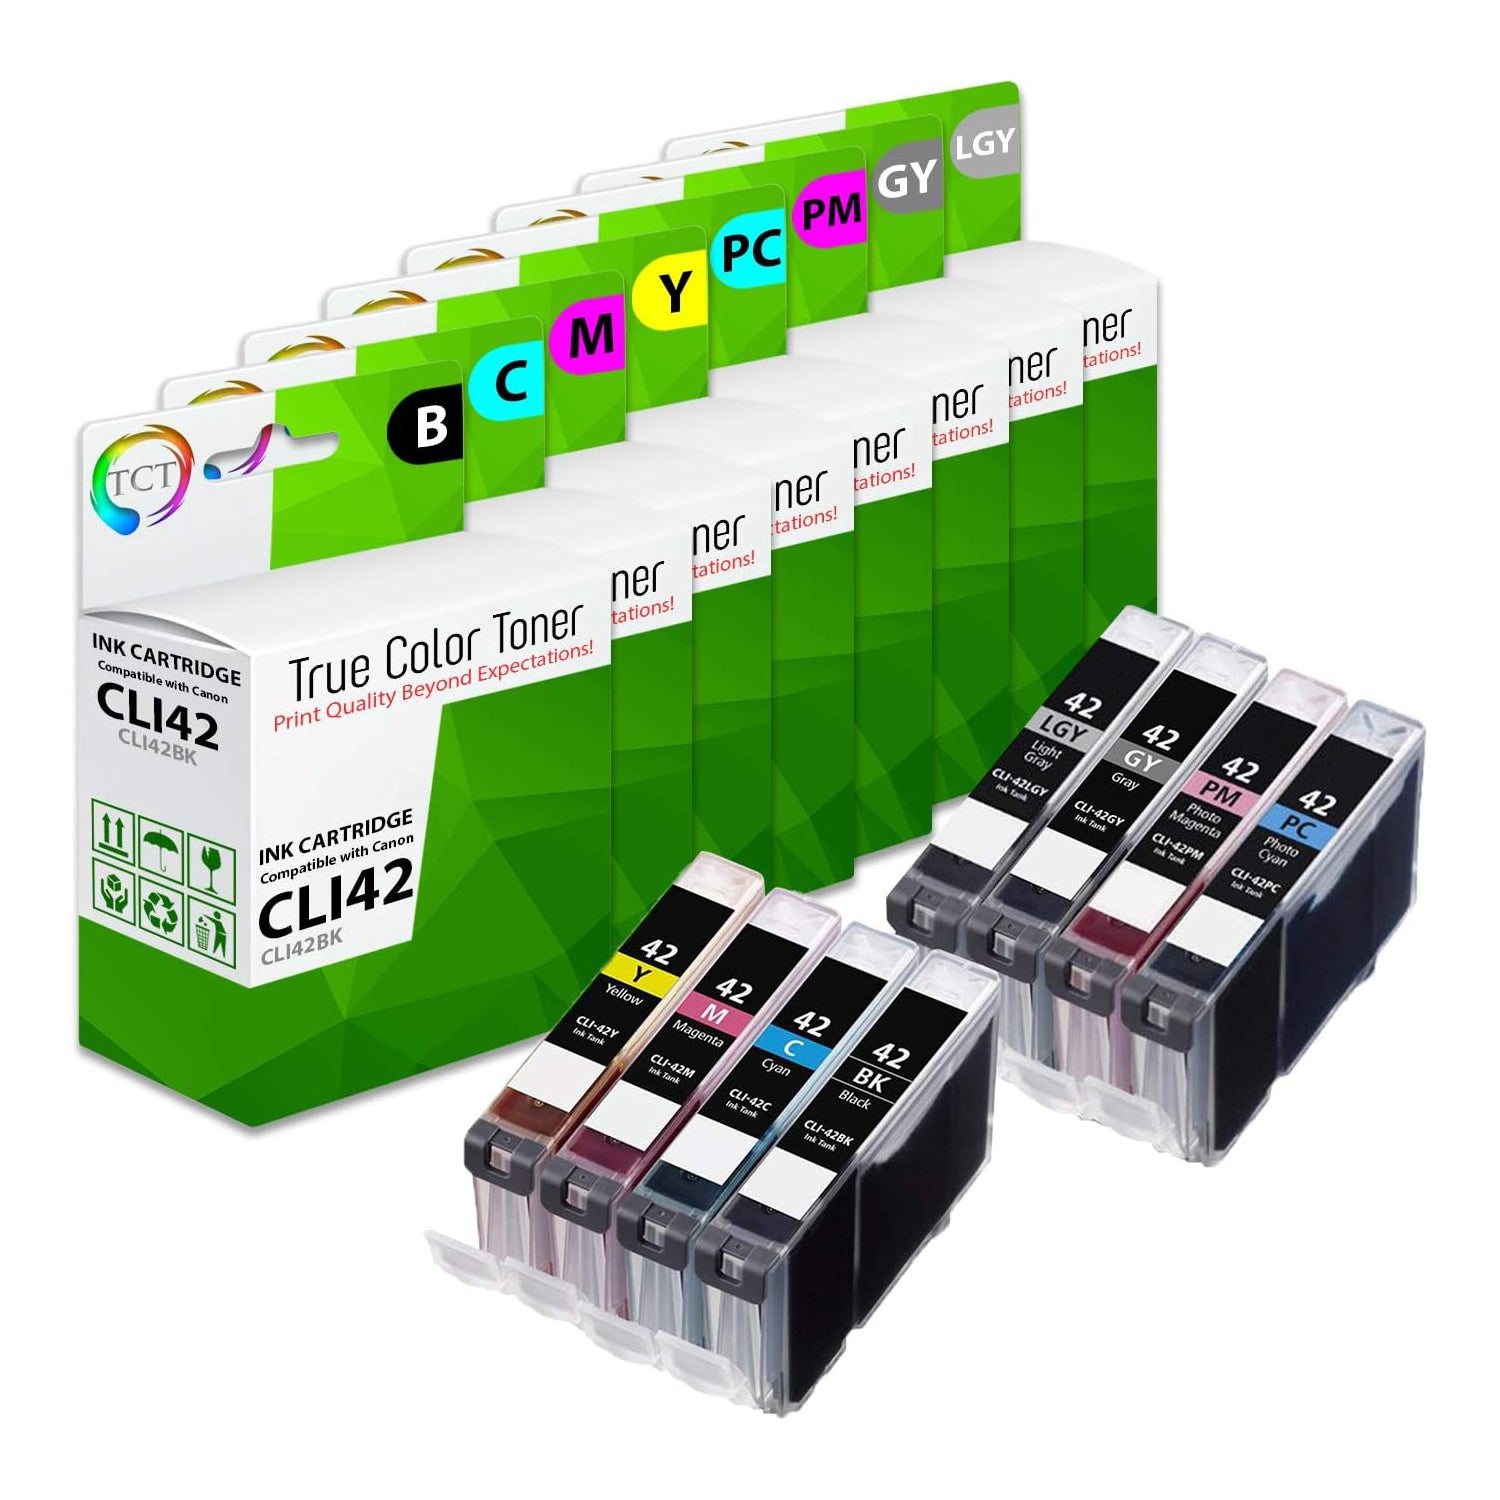 TCT Compatible Ink Cartridge Replacement for the Canon CLI-42 Series - 8PK (B,C,M,Y,PC,PM,G,LG)